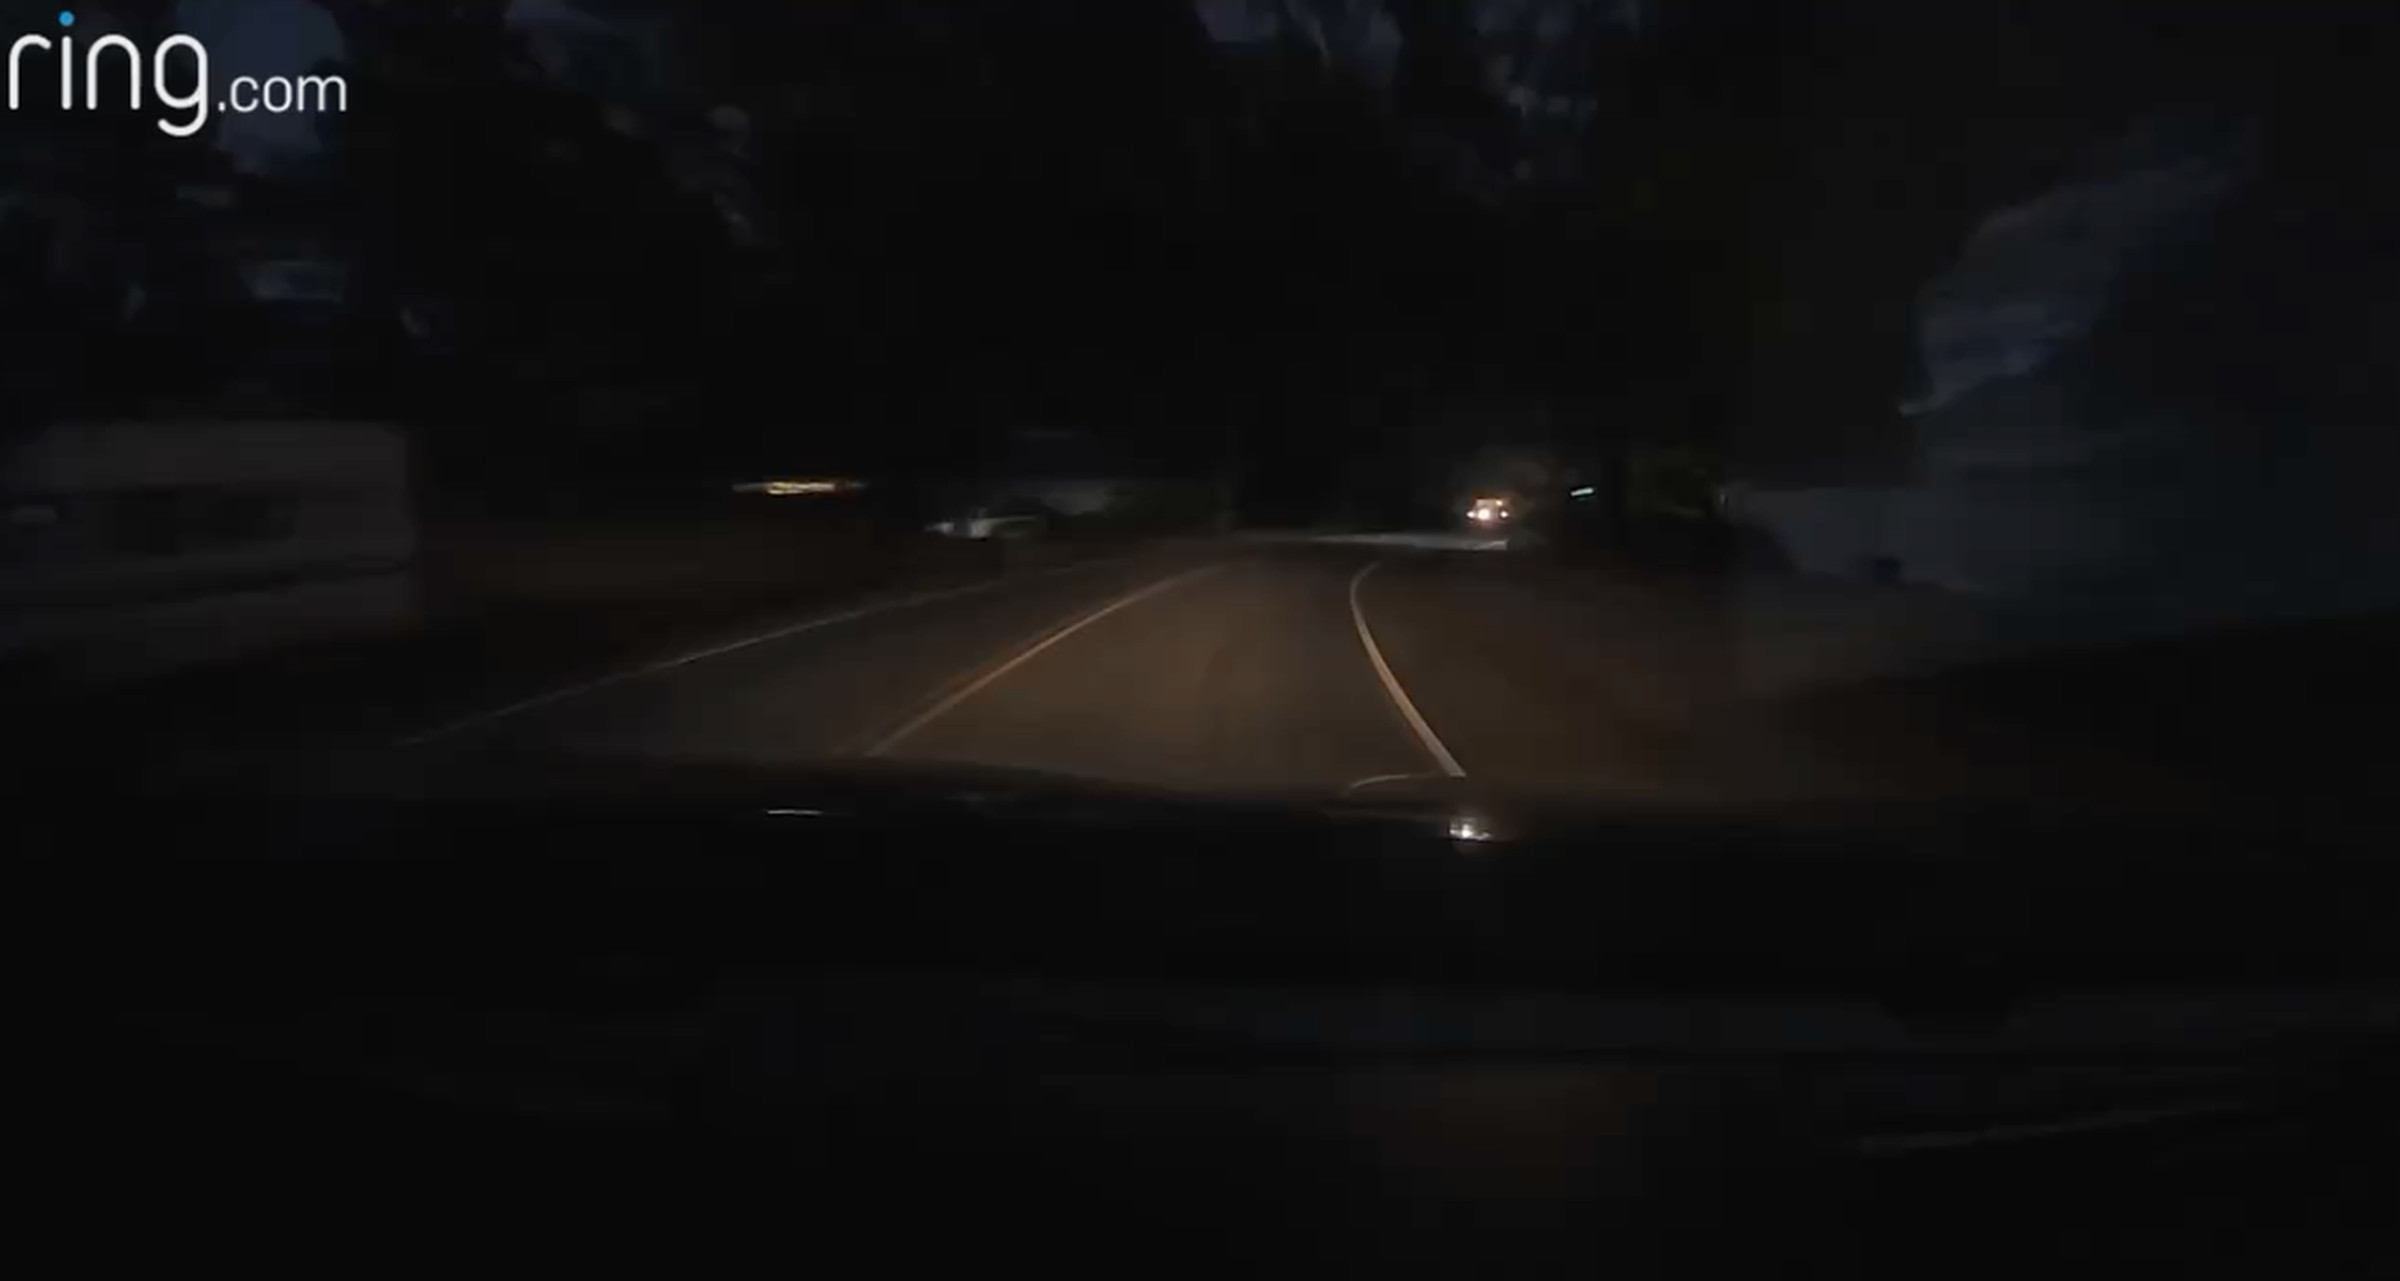 The nighttime drive video was not very clear in my poorly lit neighborhood.